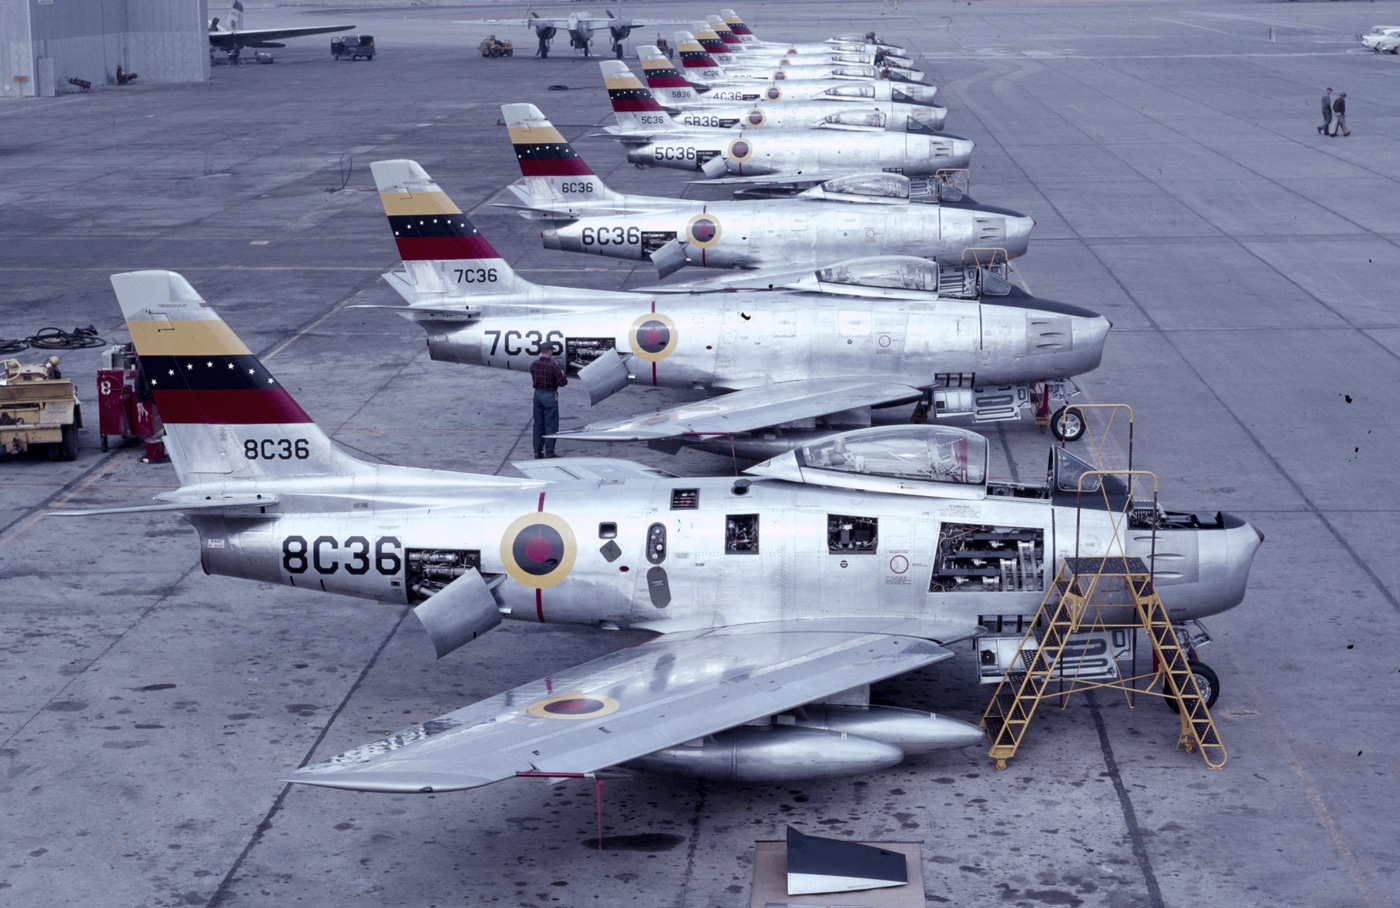 In this image, we see a line of North American F-86F fighters that were being sold to Venezuela. While the Sabre is best known in the service of the United States, it flew in the air forces of many US allies. 